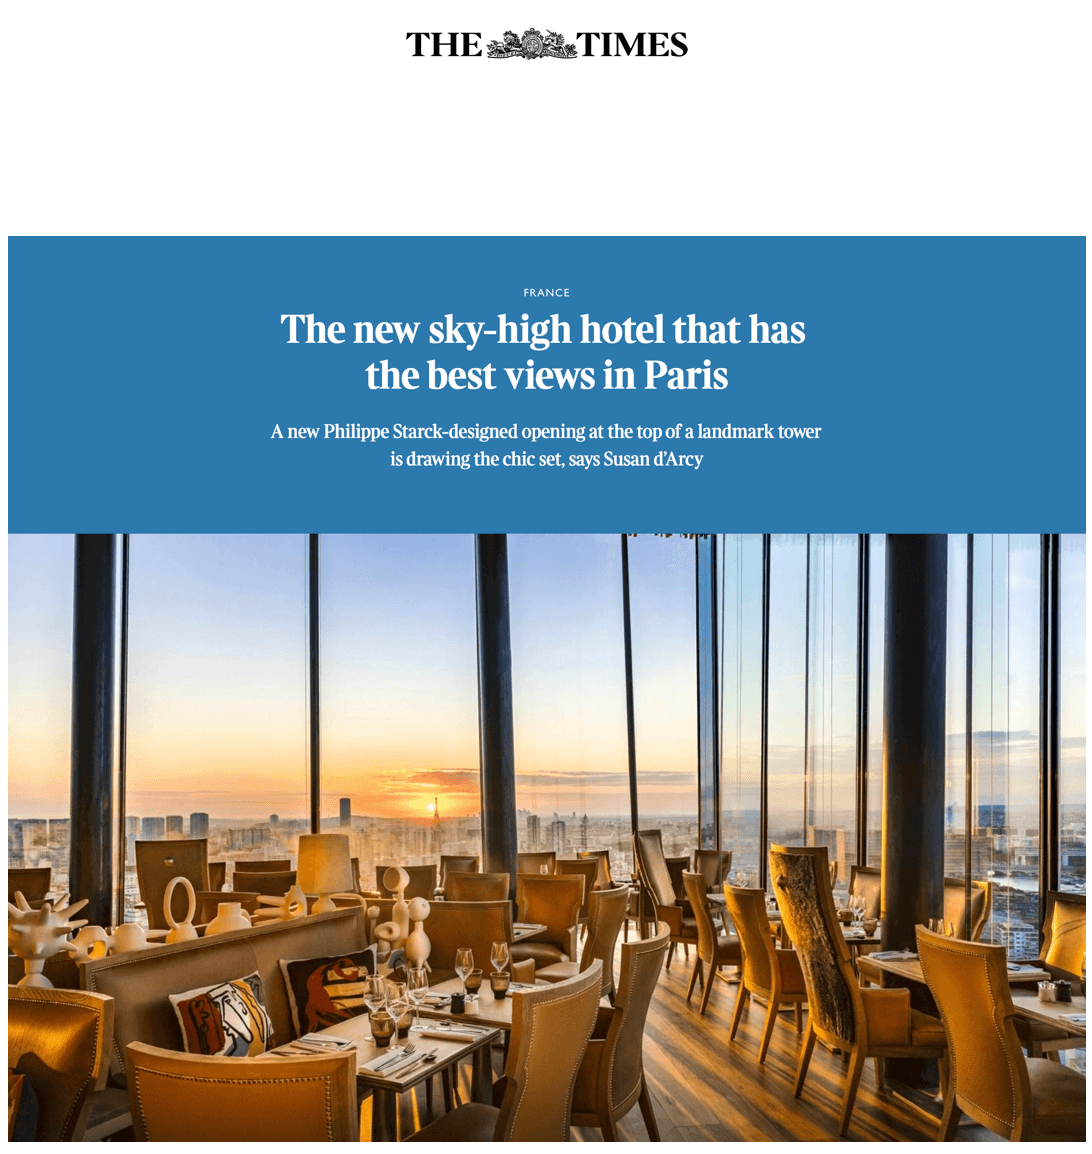 The new sky-high hotel that has the best views in Paris